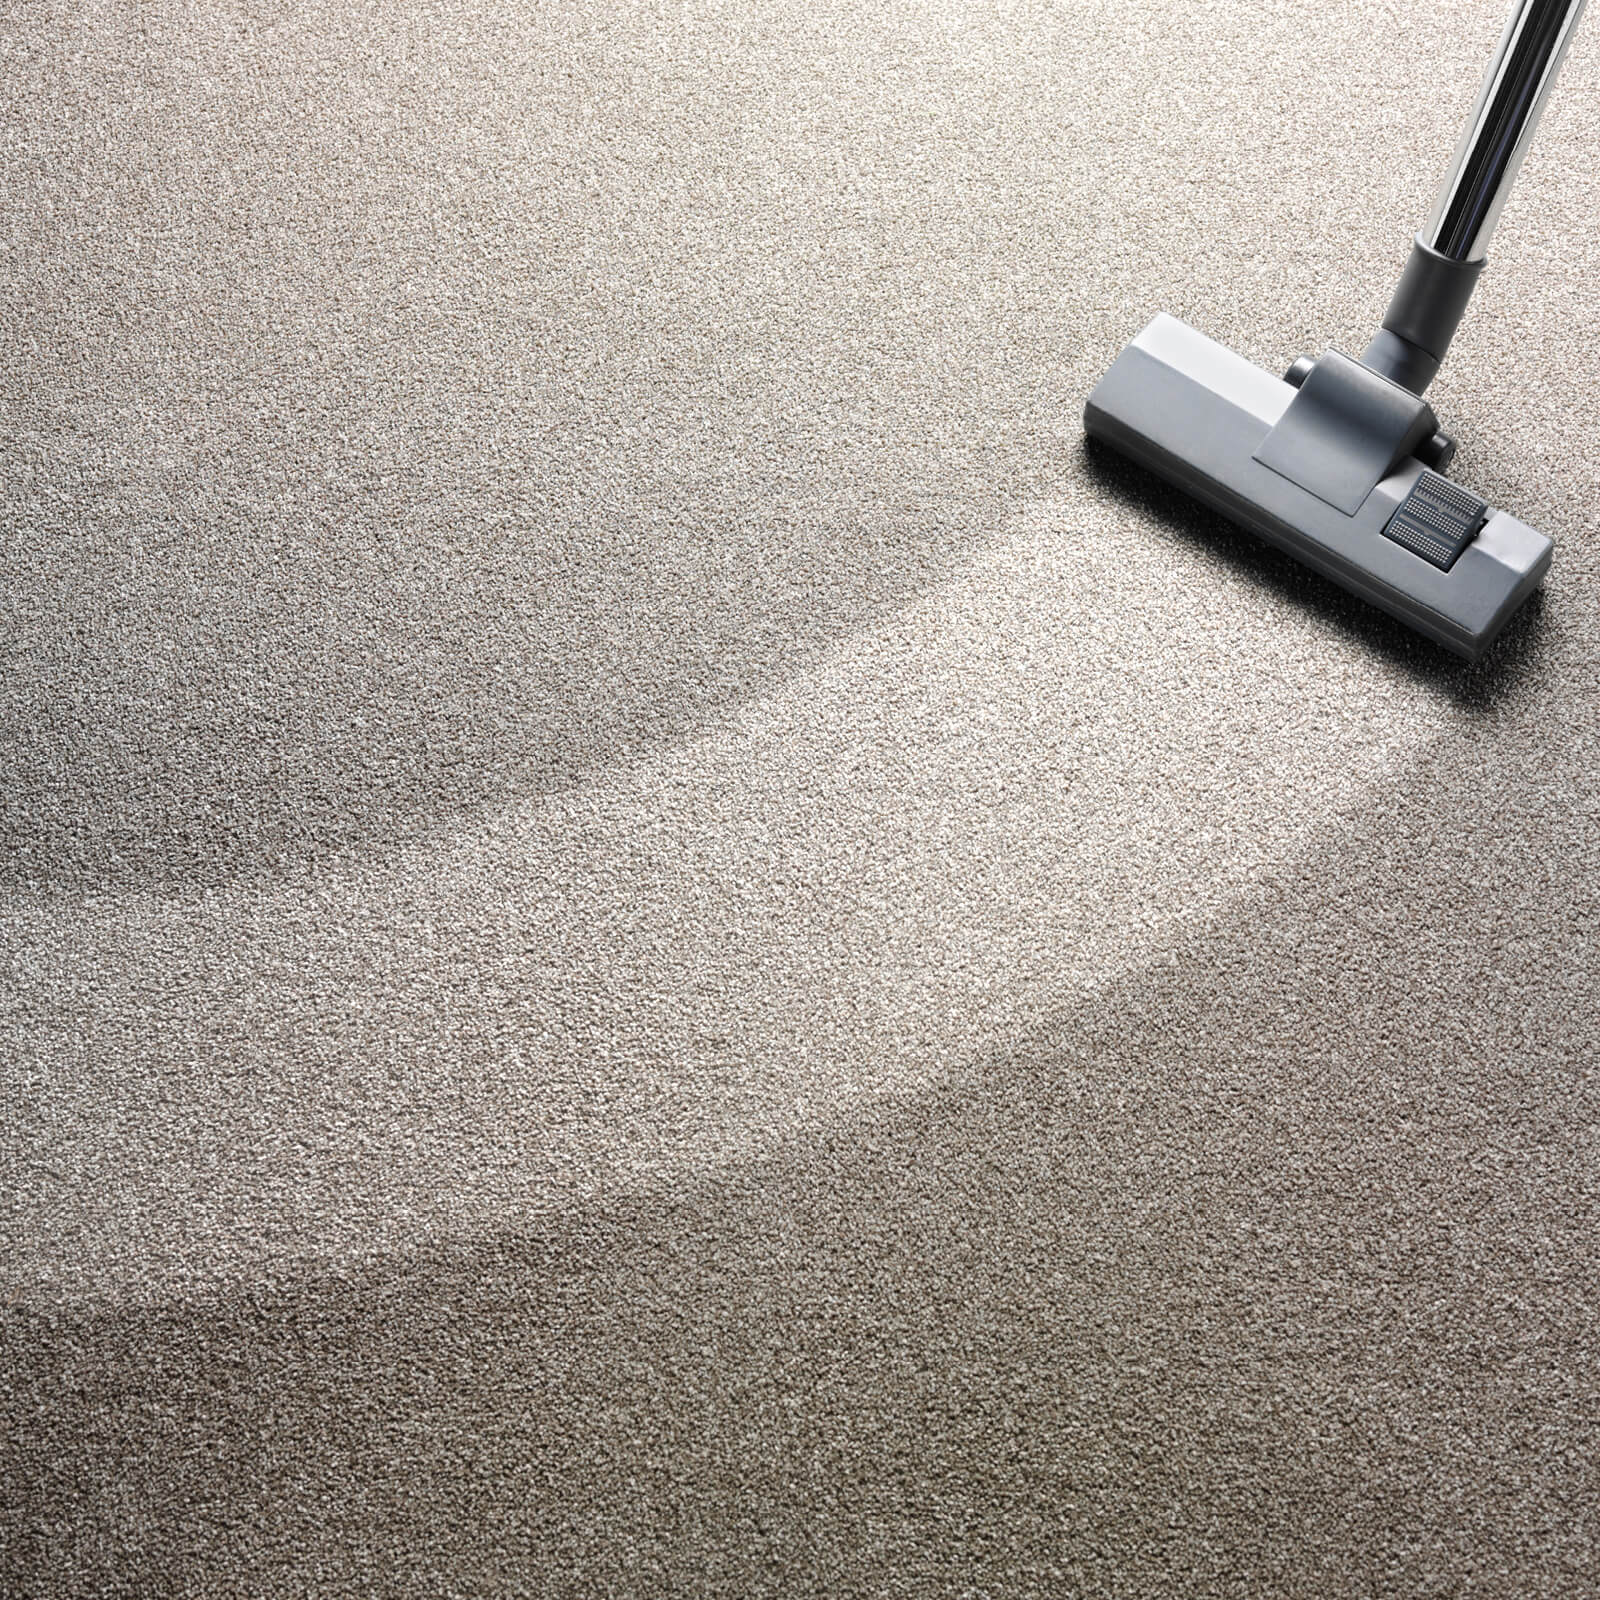 carpet_cleaning_1600x1600